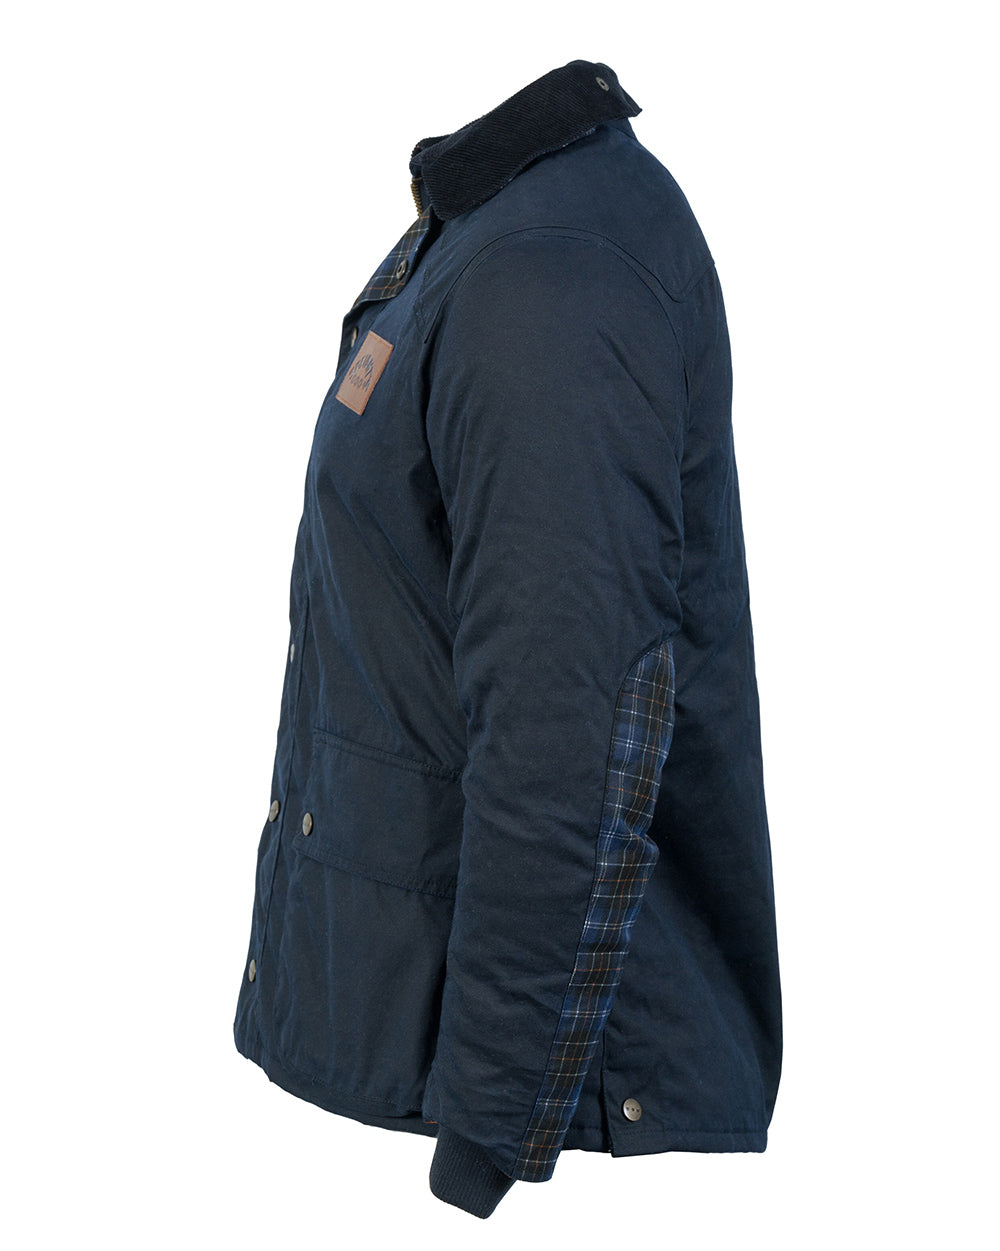 Speight's Oilskin Jacket -  Beer Gear Apparel & Merchandise - Speights - Lion Red - VB - Tokyo Dy merch